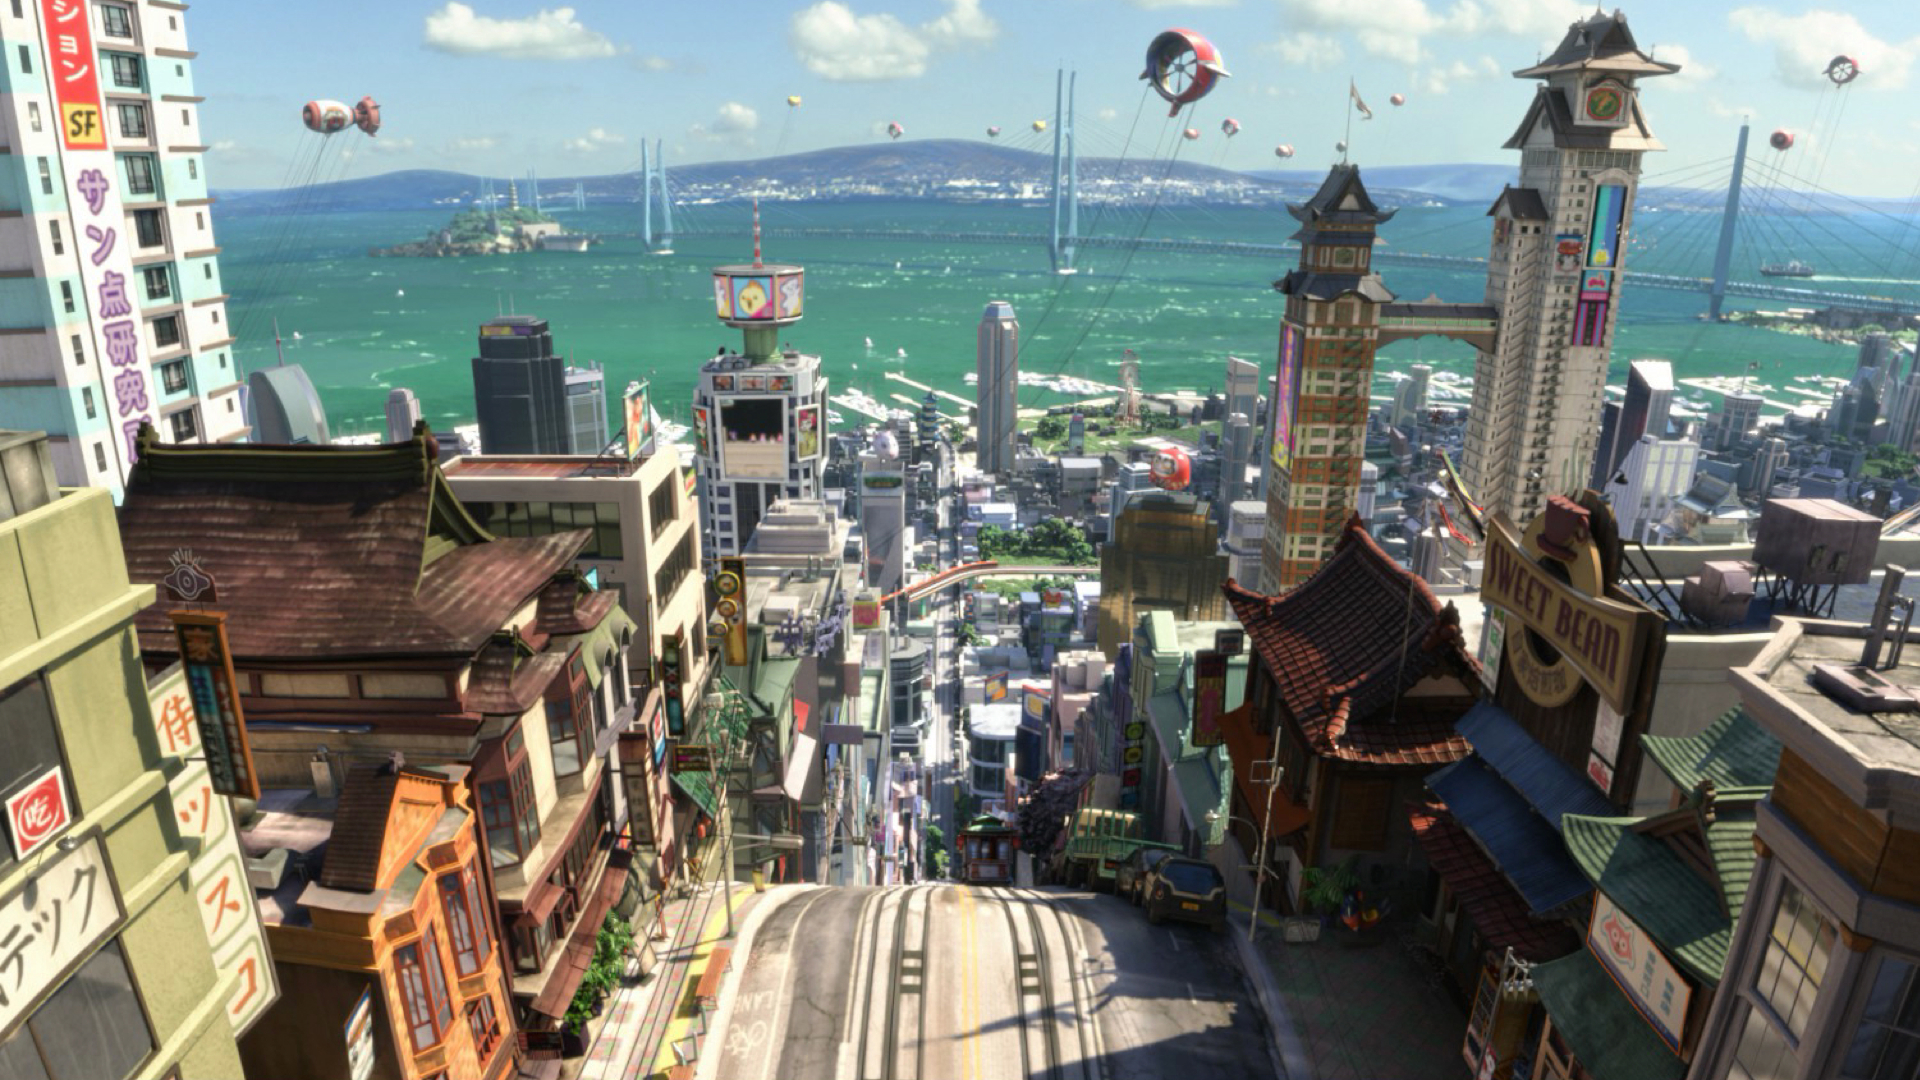 "BIG HERO 6" – Filmmakers captured the busy look of a bustling multicultural city in an early visual test of the look of San Fransokyo in the daytime. ©2014 Disney. All Rights Reserved.